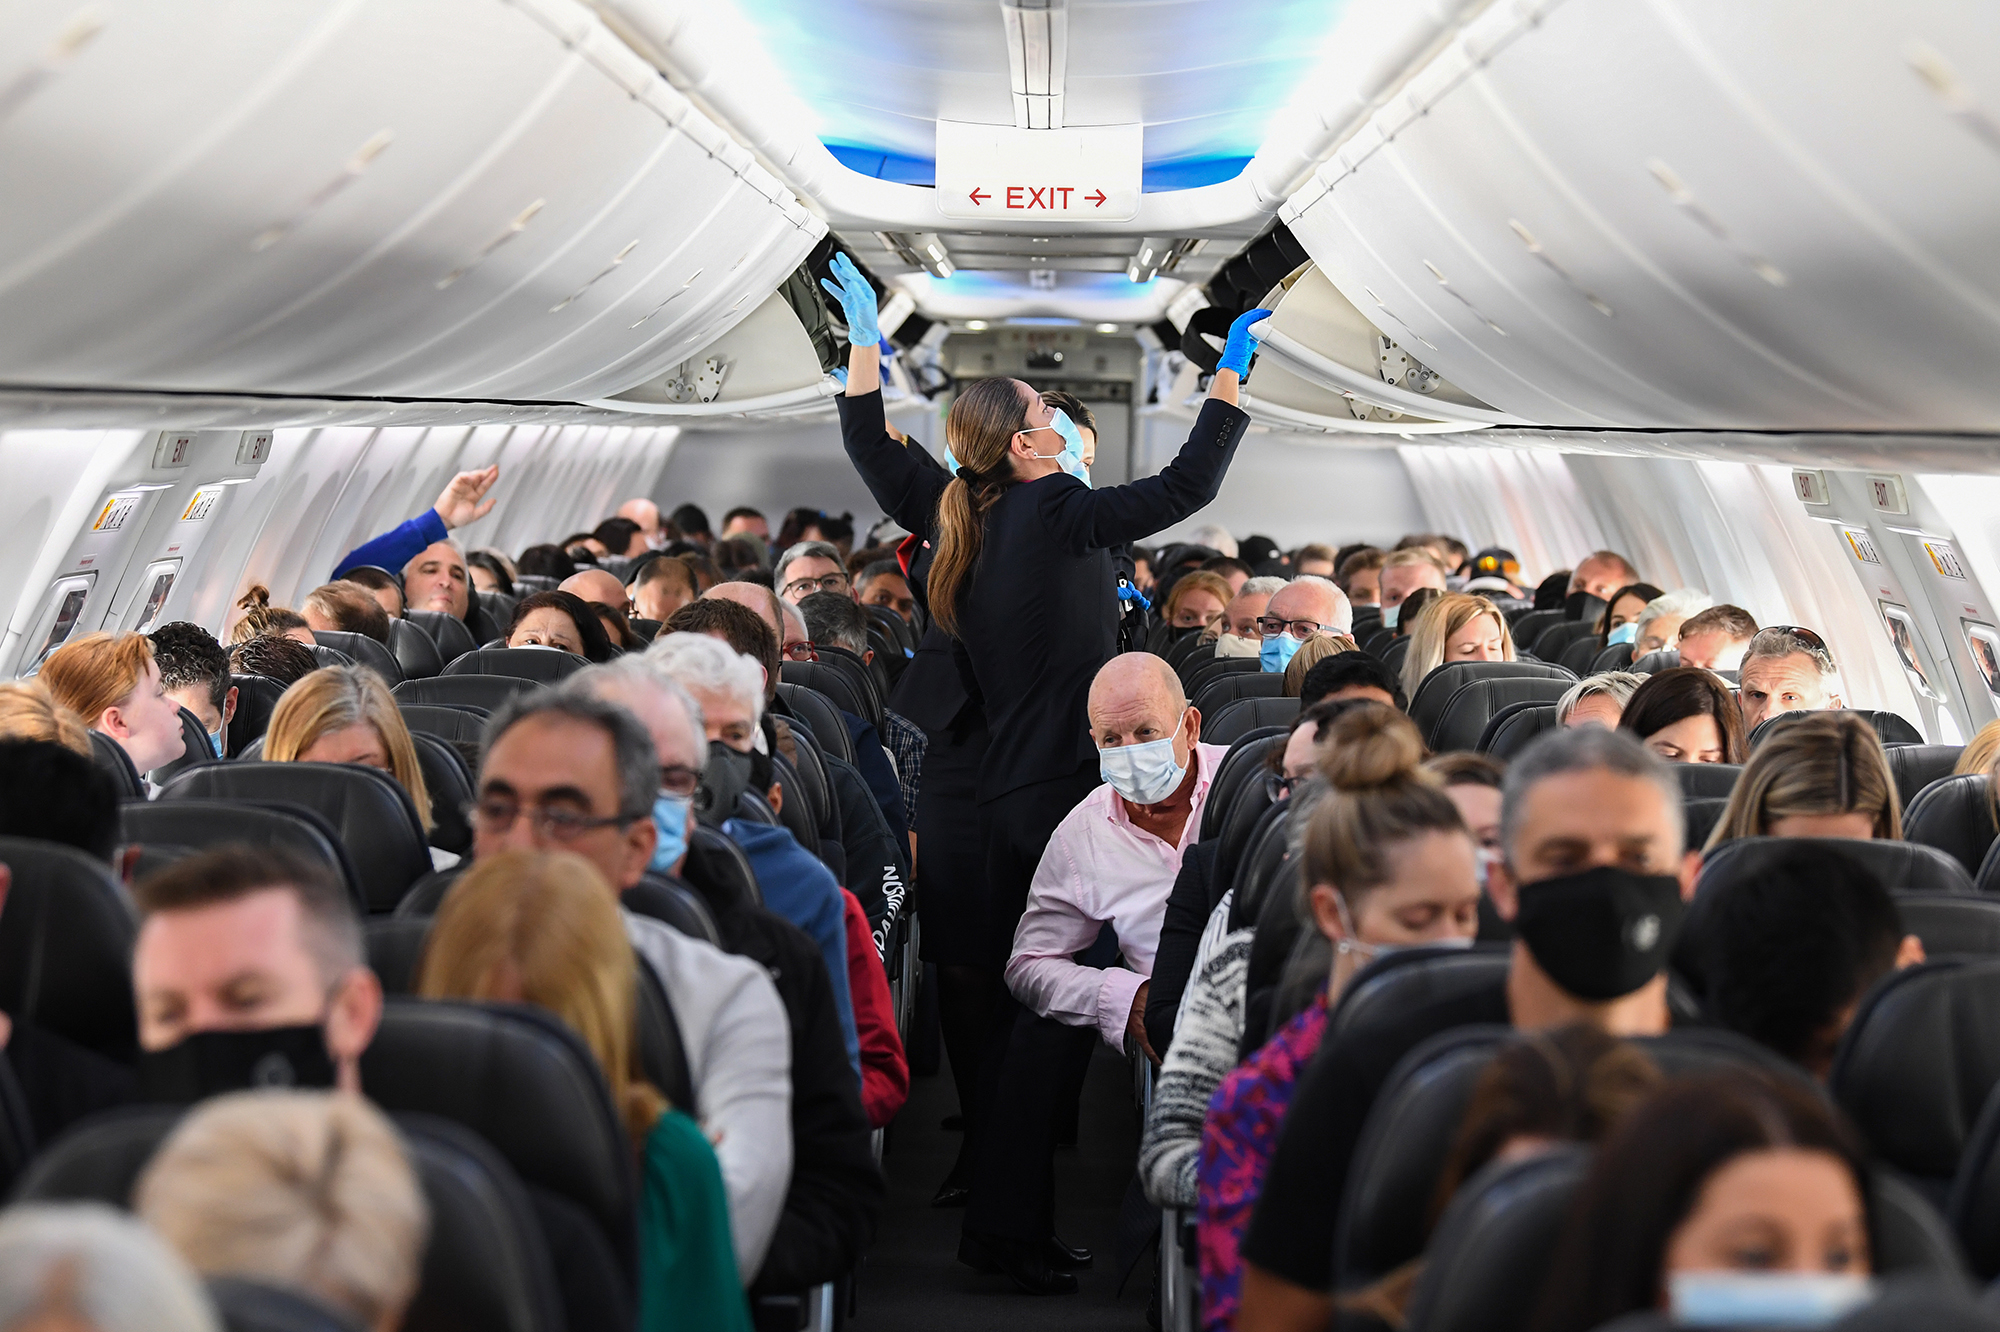 The more crowded the plane and the longer the flight time, the thicker the amount of deflated gas in the air